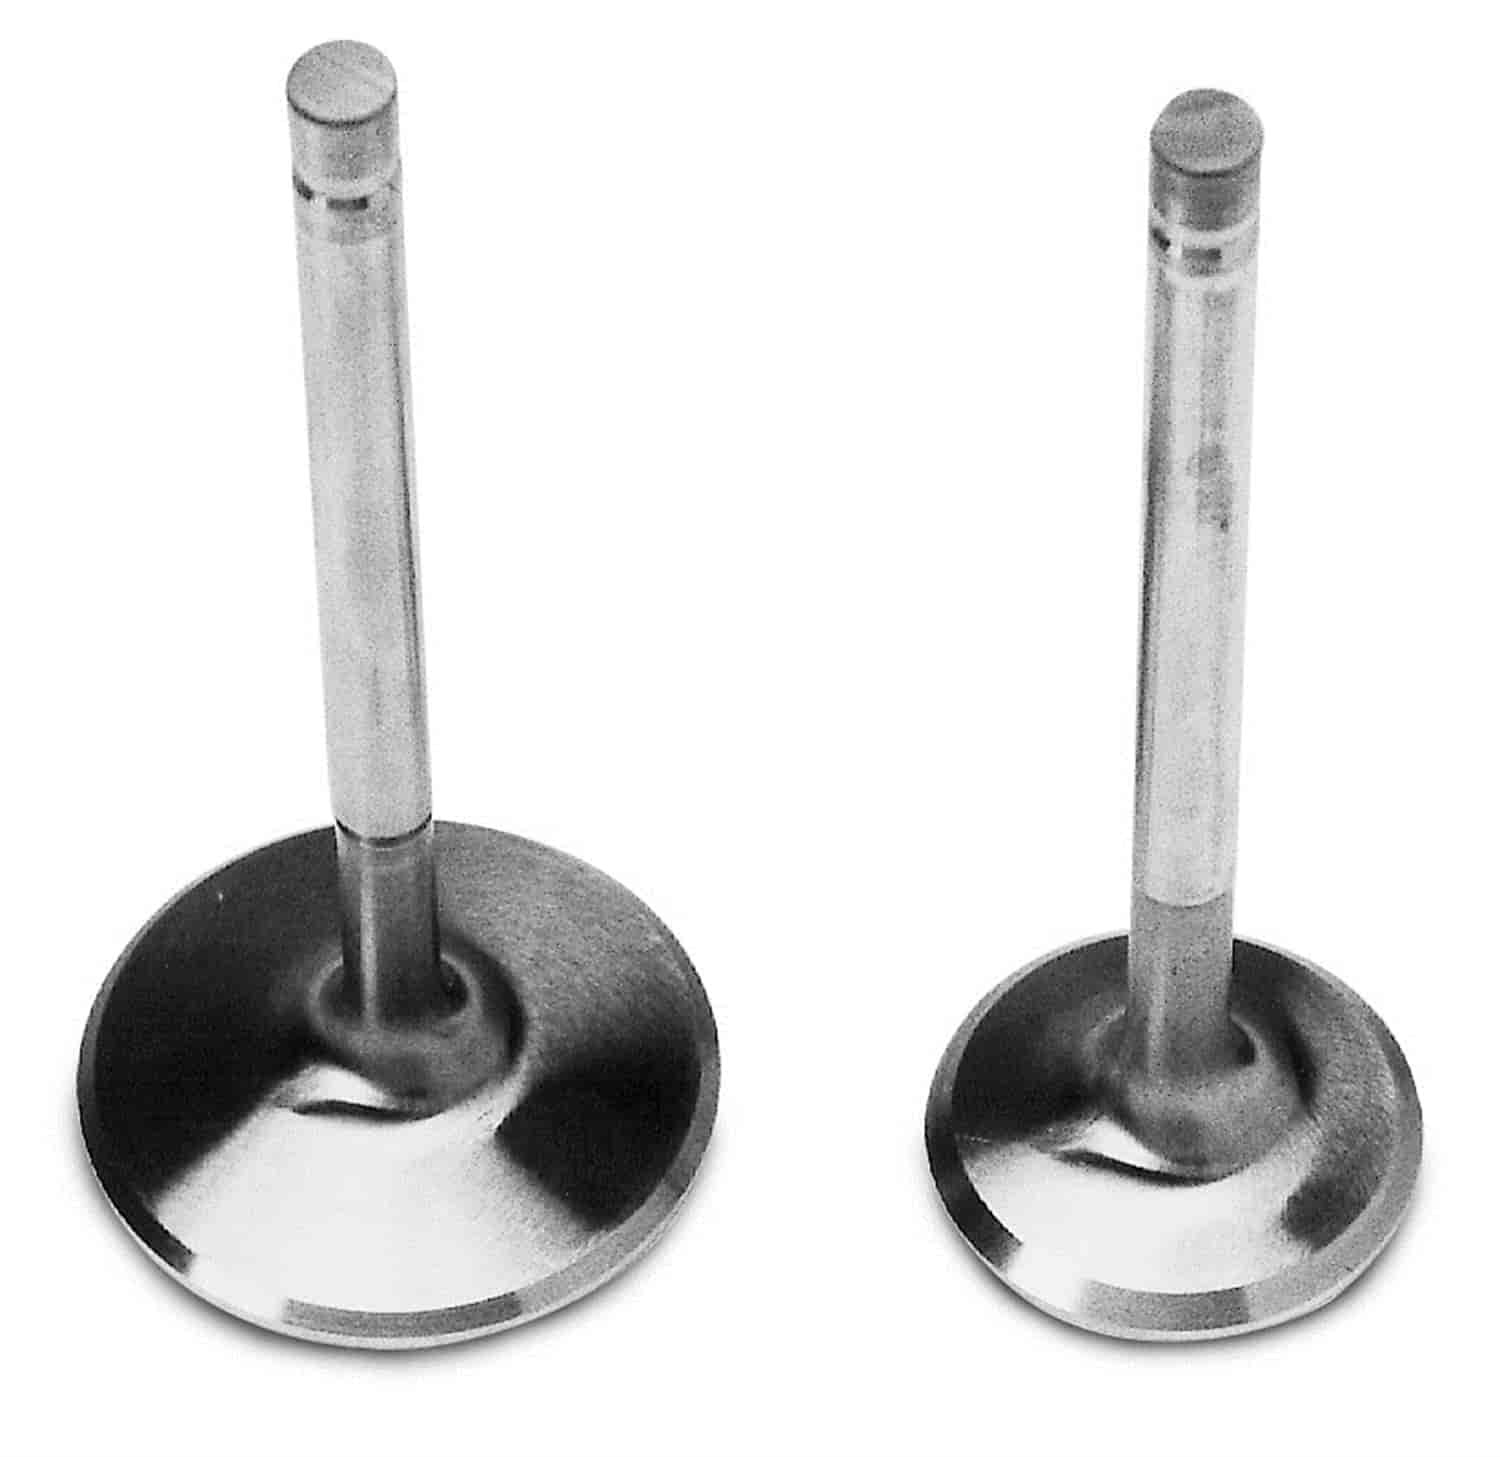 Single Exhaust Valve 1.60" for Small Block Ford #350-77169, 350-77179, 350-77189, 350-77199, & 350-77359